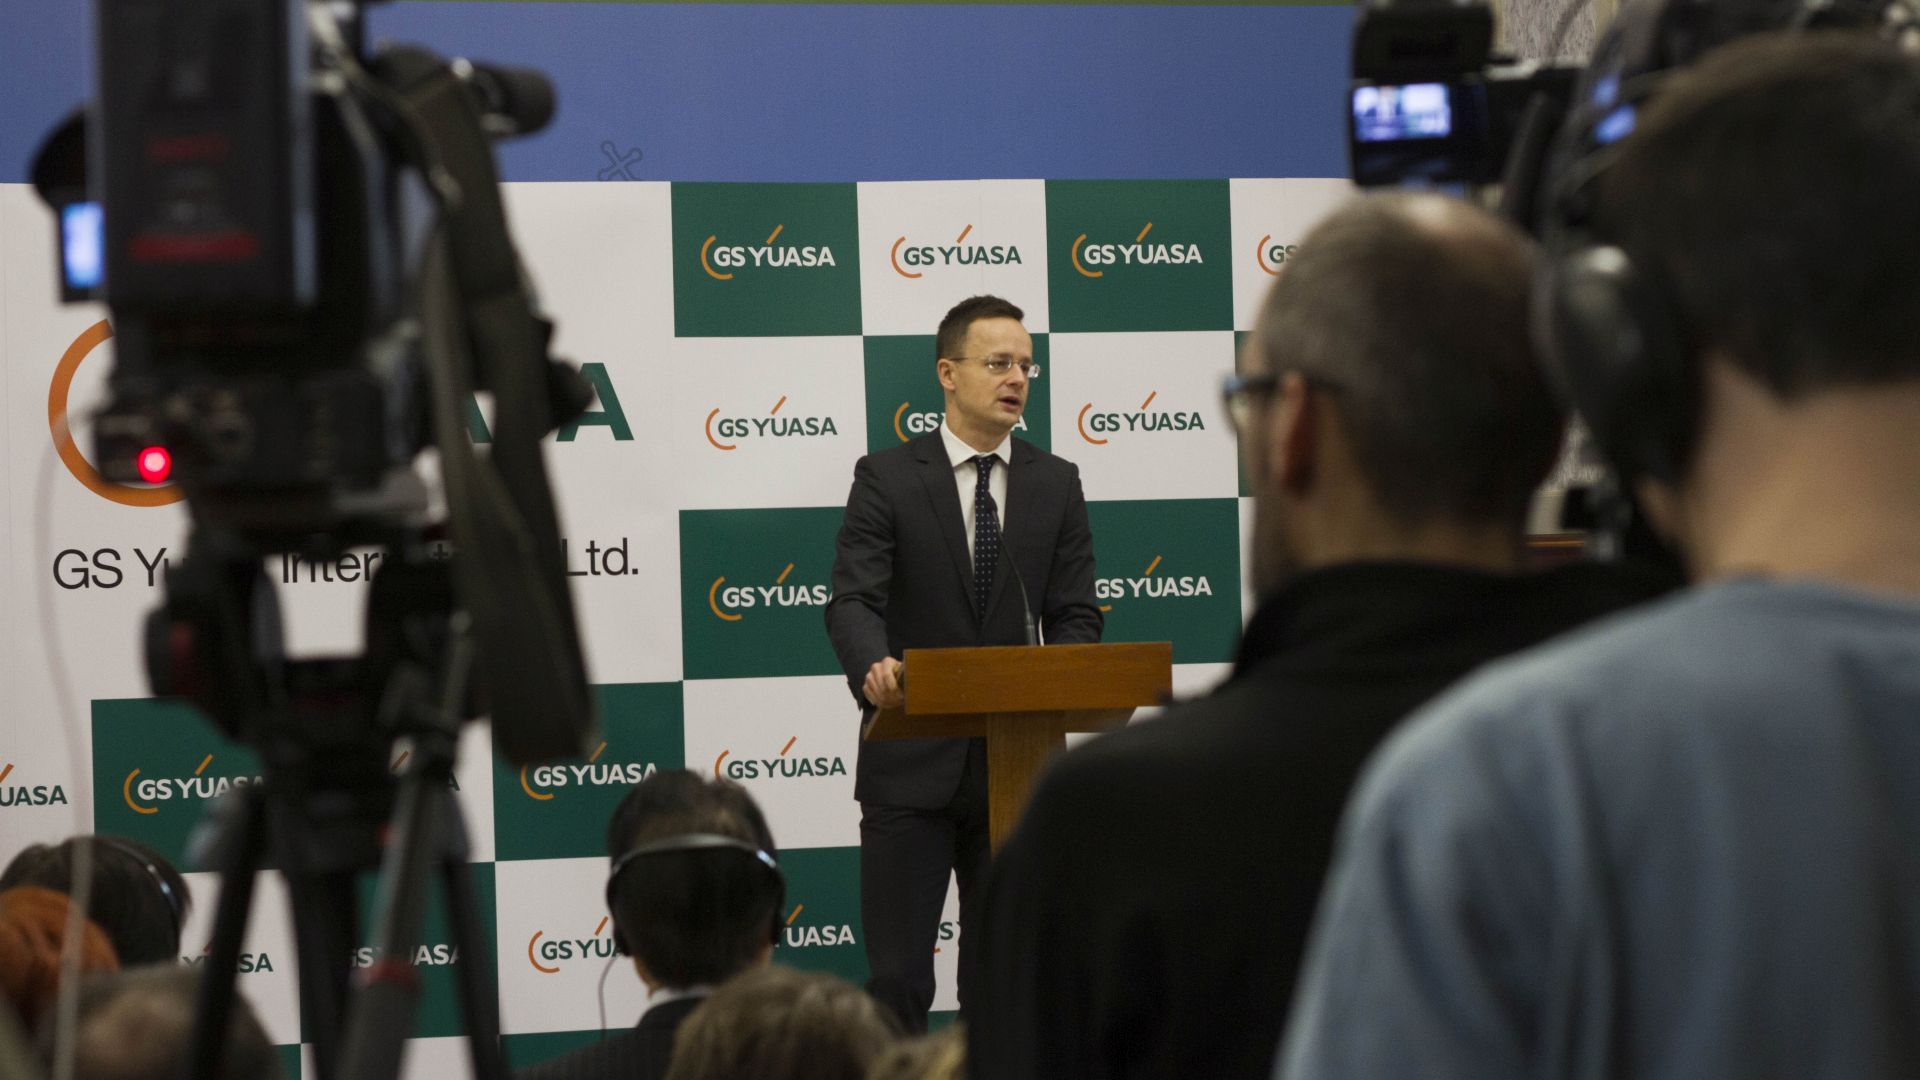 Péter Szijjártó, Minister of Foreign Affairs and Trade at the announcement of the investment